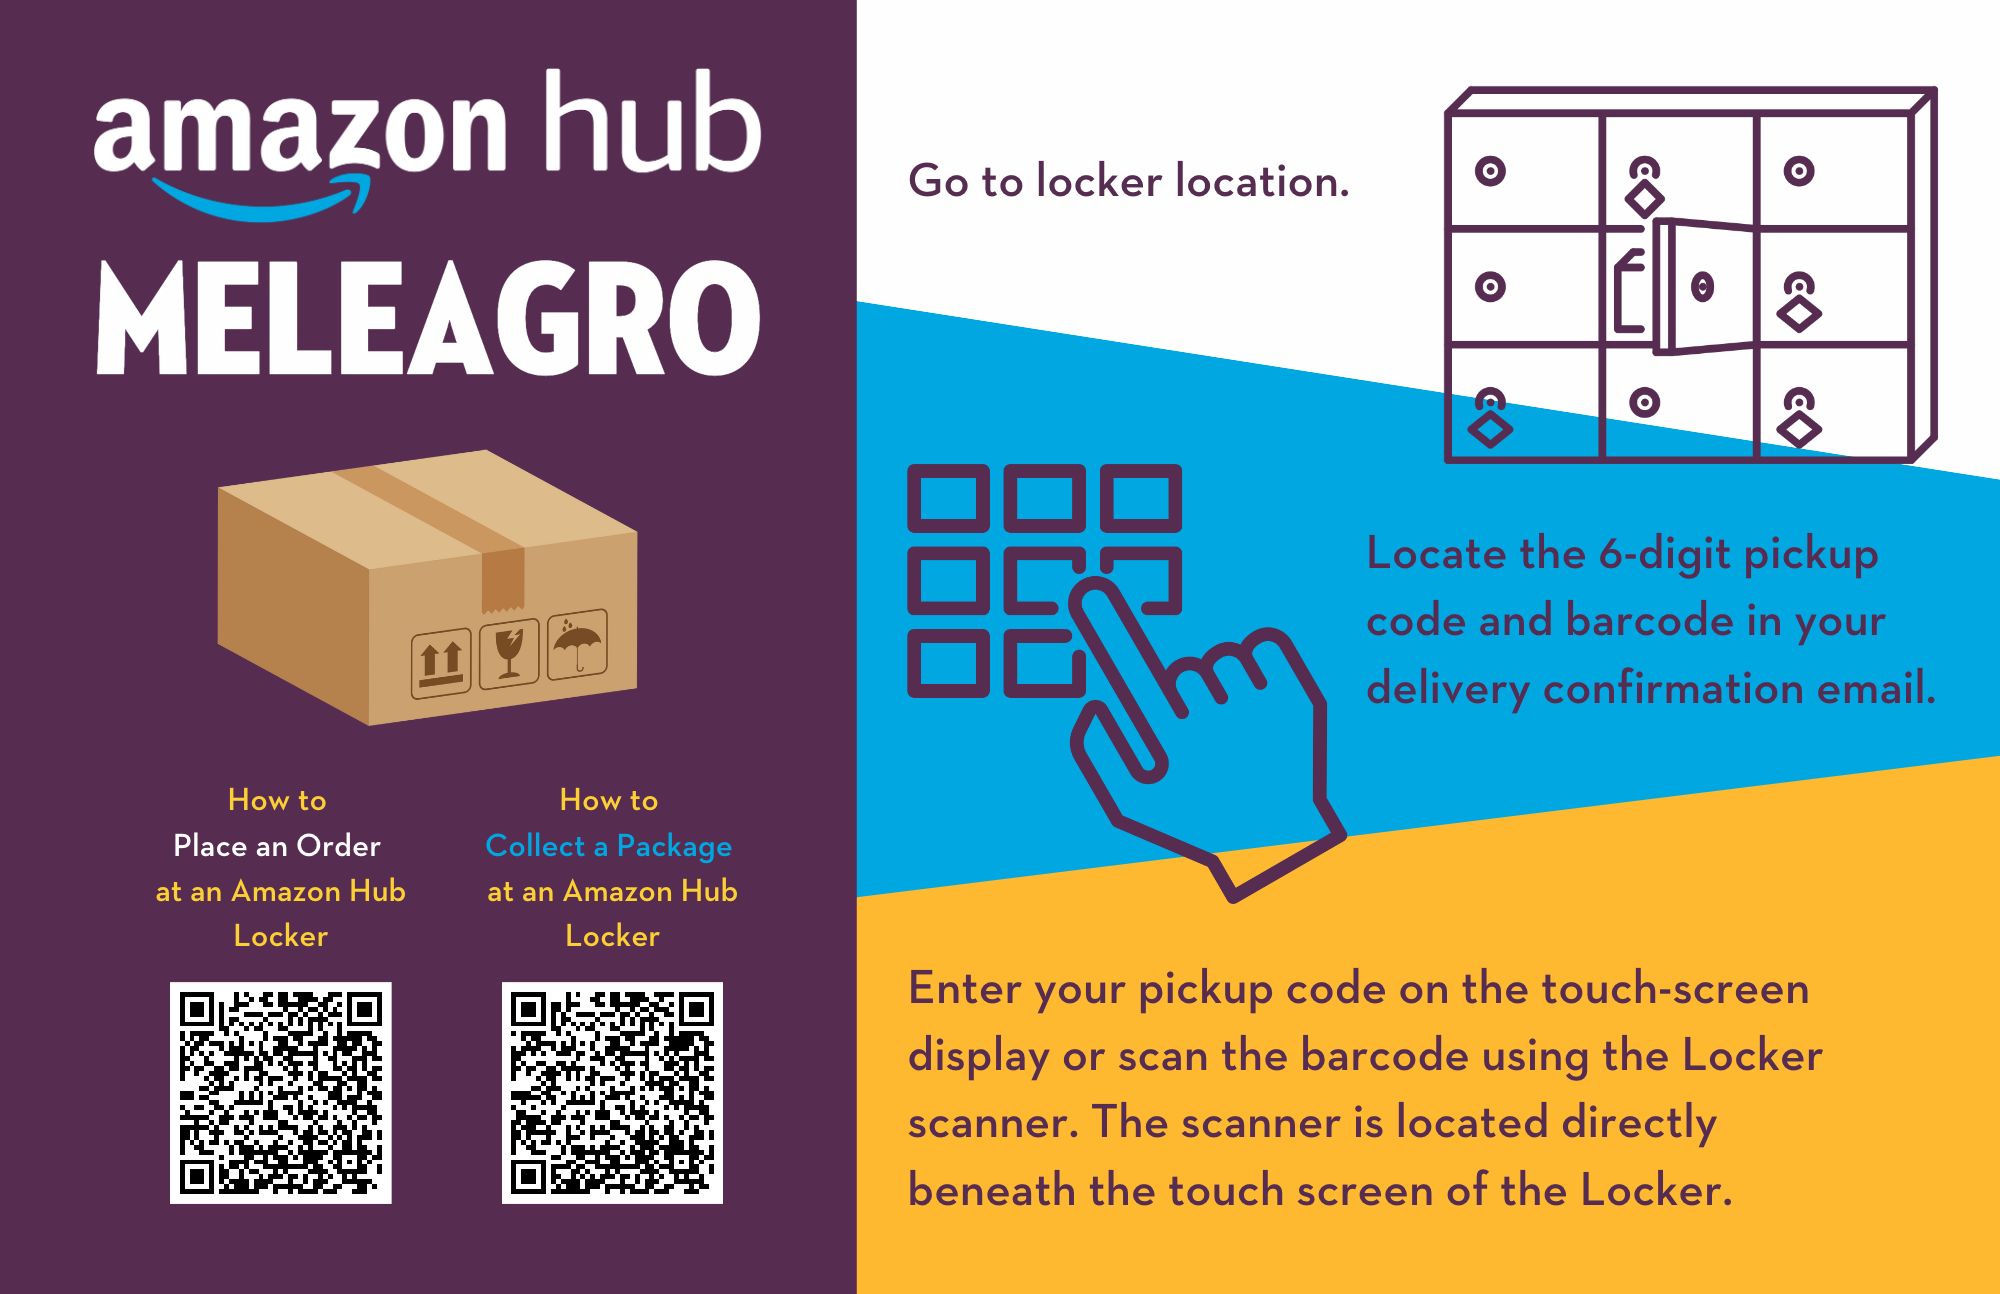 Amazon Lockers are coming to Chestnut Hill College. Scan the QR code to learn how to use the new lockers.